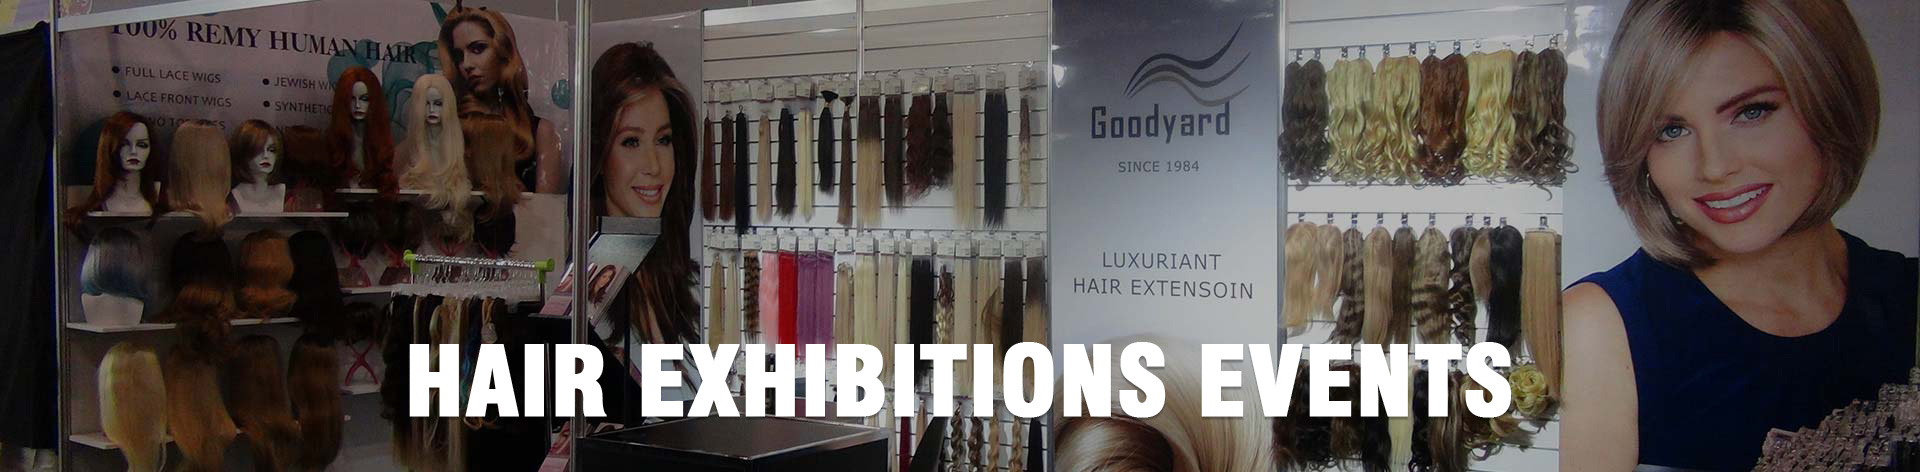 HAIR EXHIBITIONS EVENTS